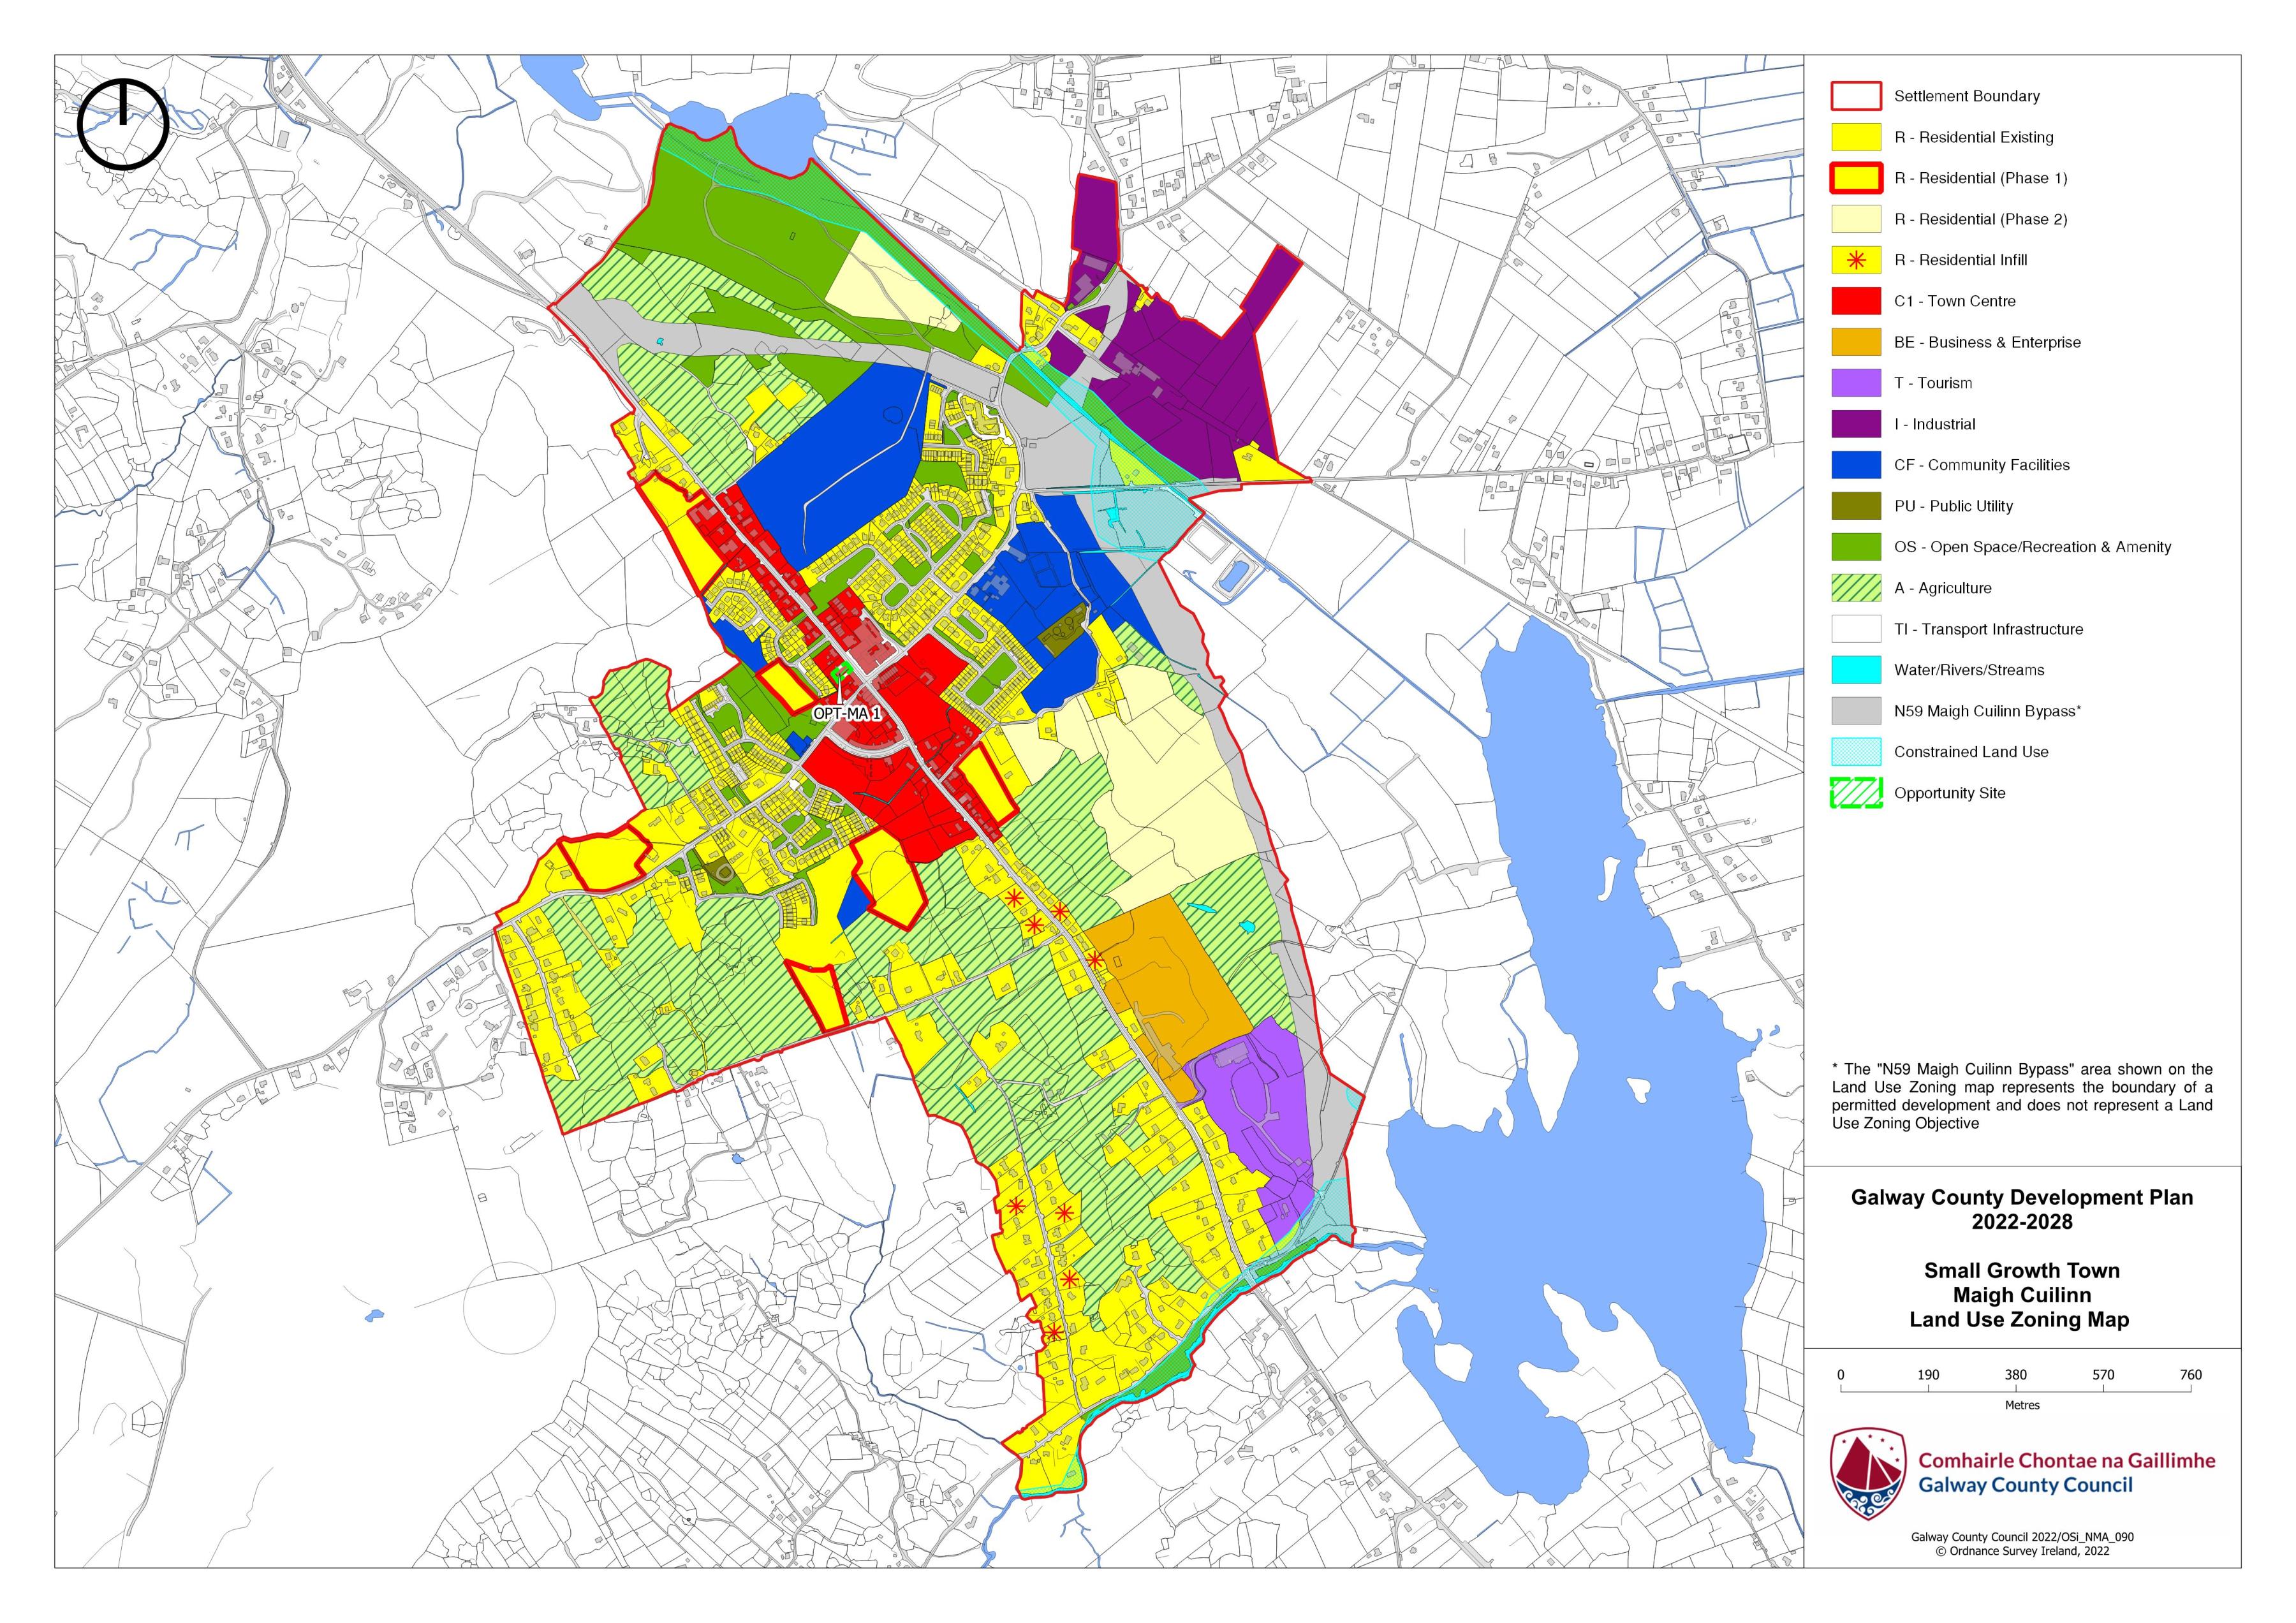 Maigh Cuilinn Land Use Zoning Map